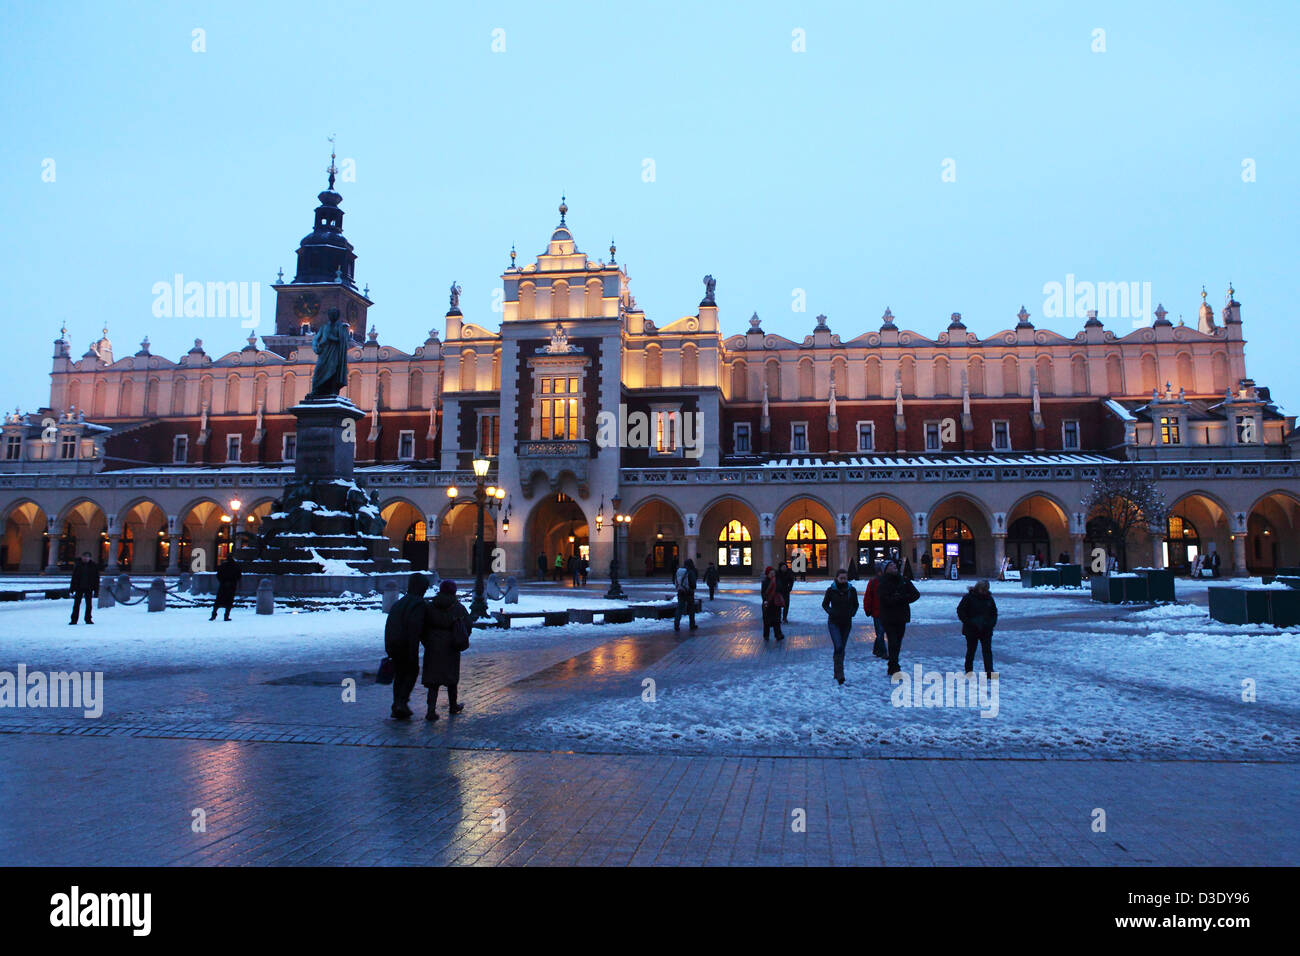 The Cloth Hall (Sukiennice) at dusk in the Old Town (Stare Miasto) in Kraków, Poland. Stock Photo